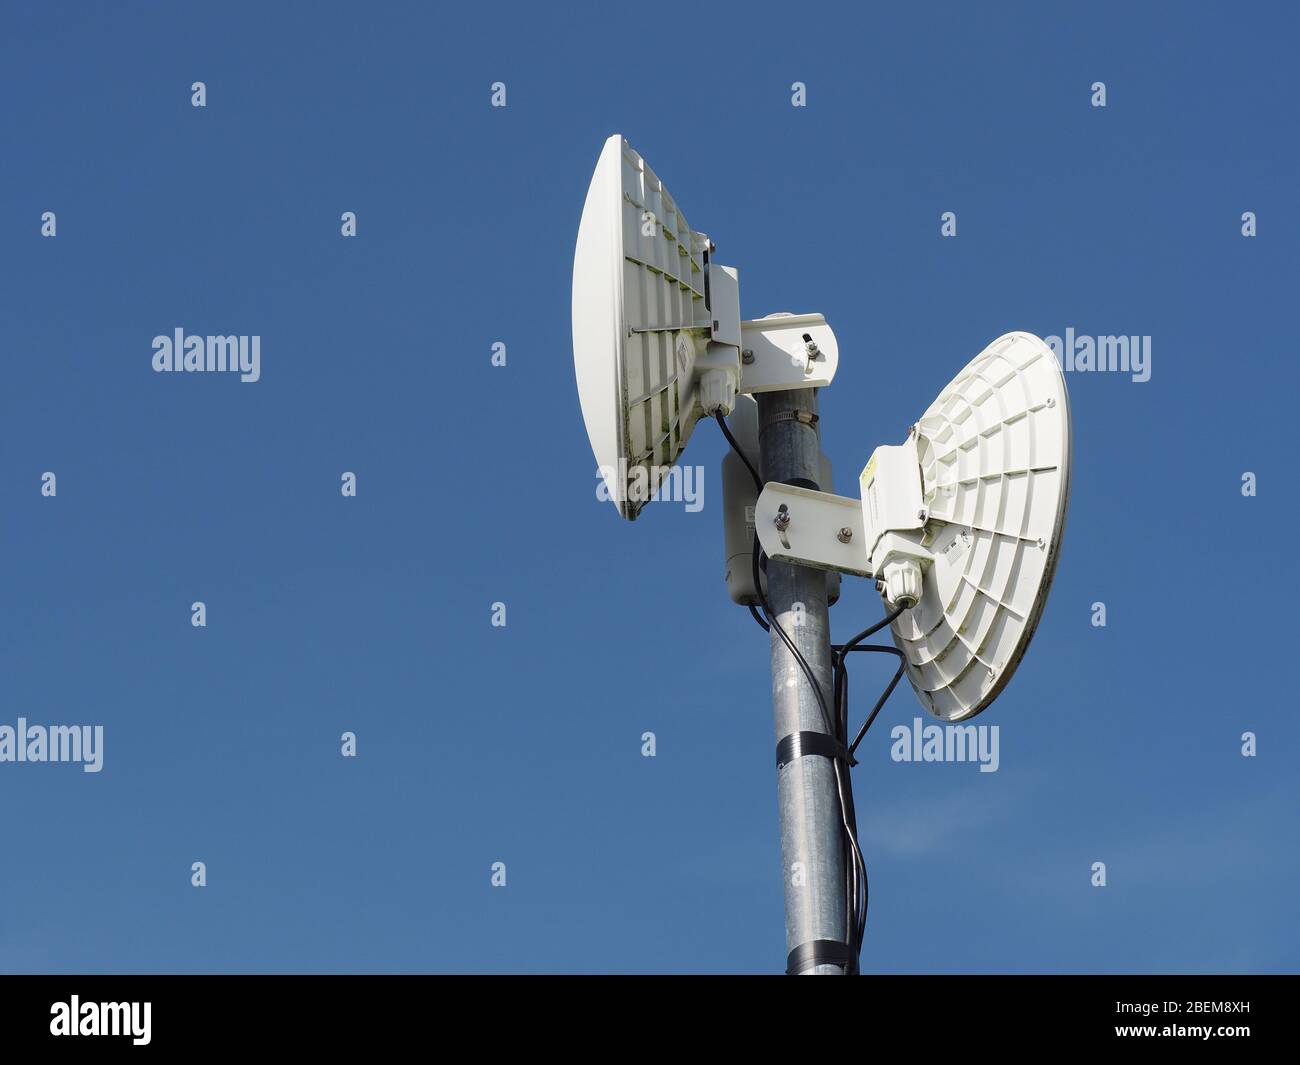 Aerials/router of rural broadband wireless Internet service. Dishes for backhaul to masts on the network backbone, upright aerials for local premises. Stock Photo